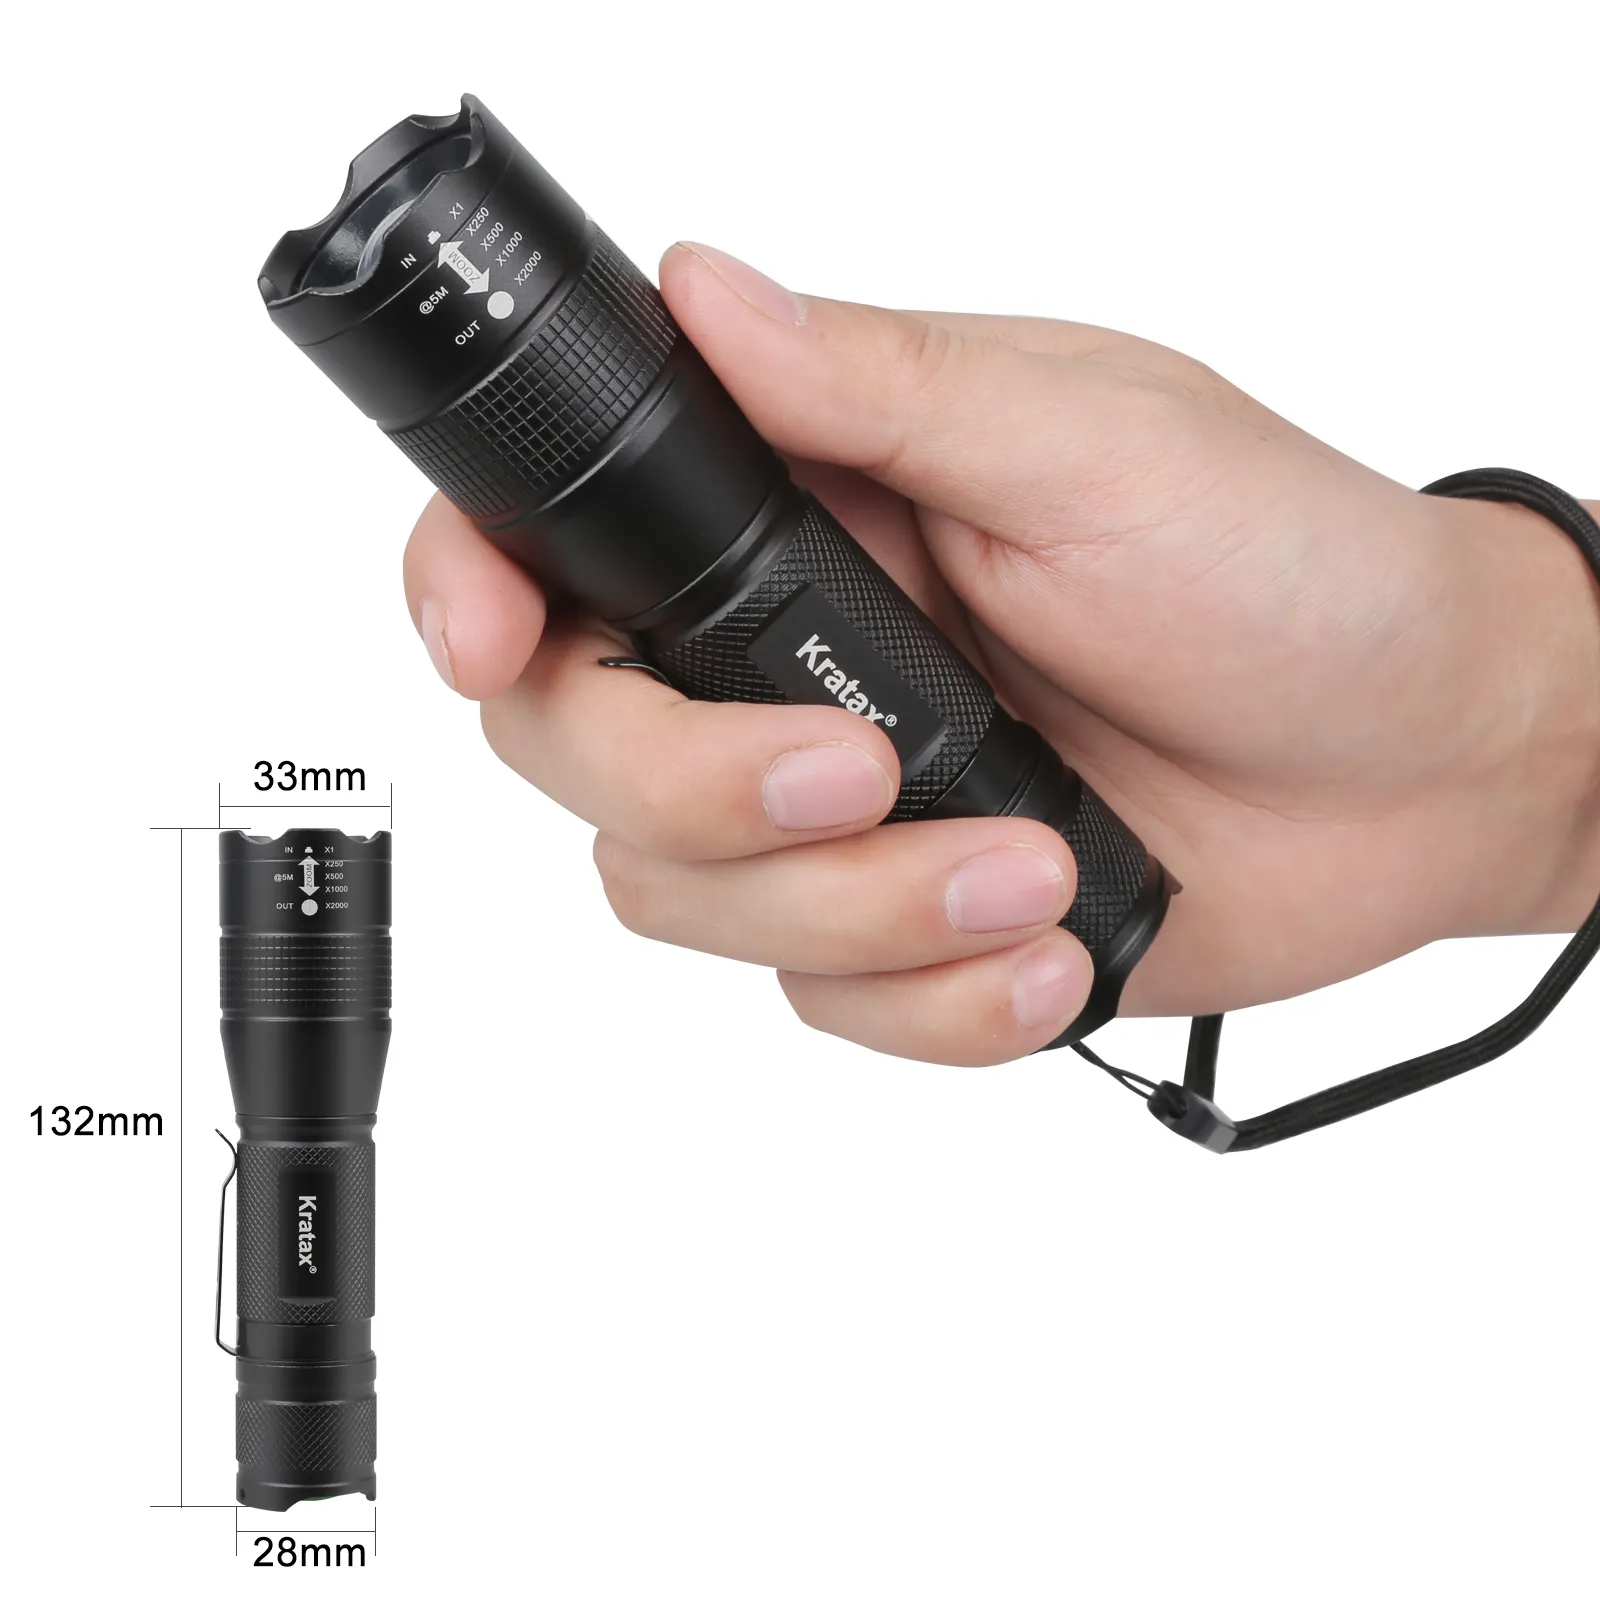 Super Bright Zoom Power emergency rechargeable led flashlights &amp torches for camping